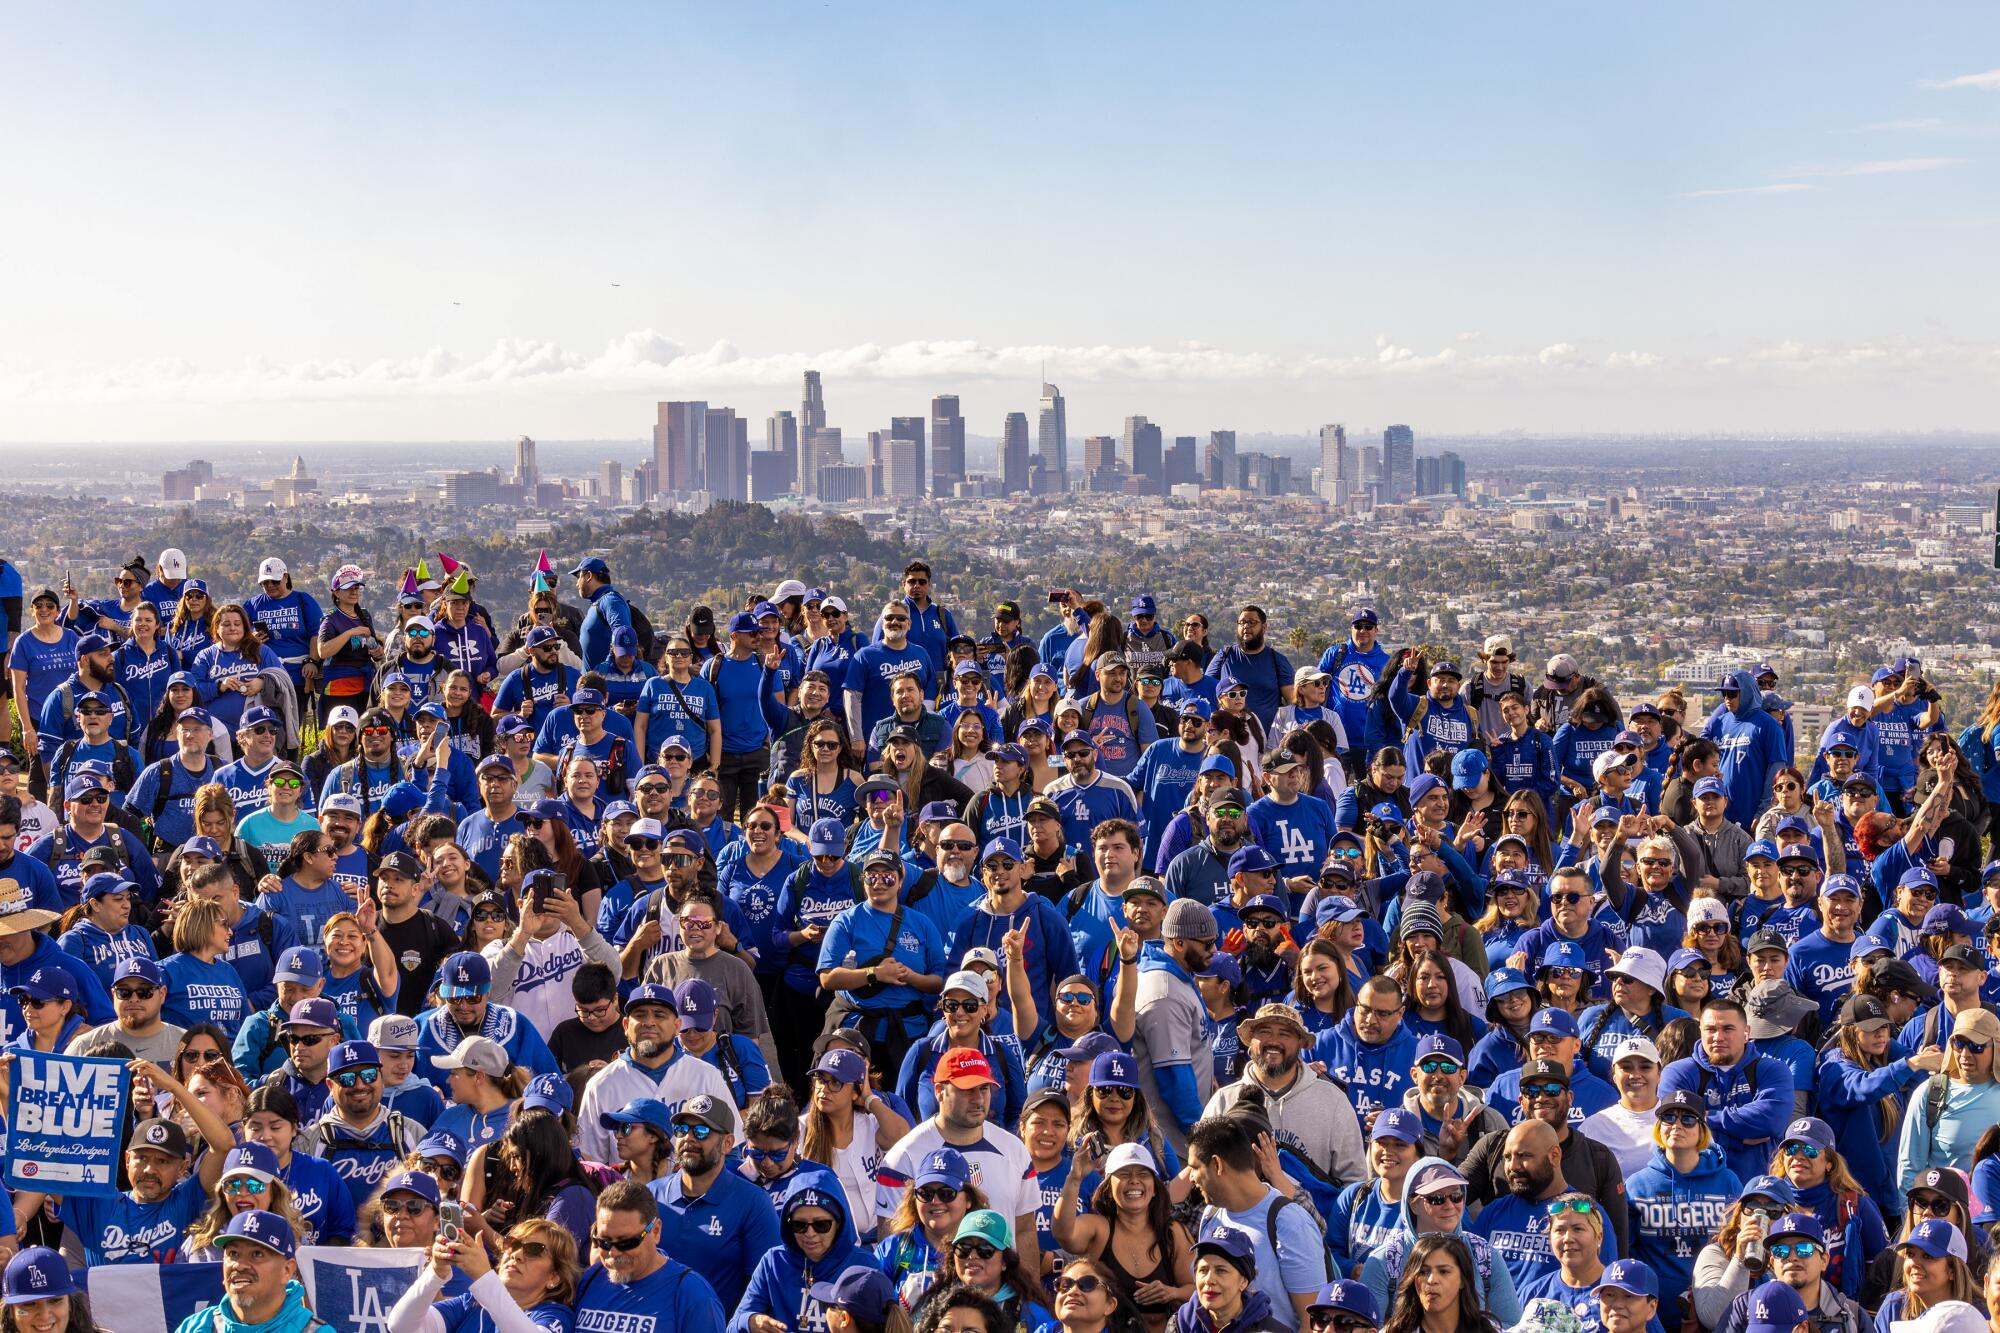 Hikers dressed in Dodger Blue gather for a group photo midway through a 6.5-mile hike through Griffith Park. 